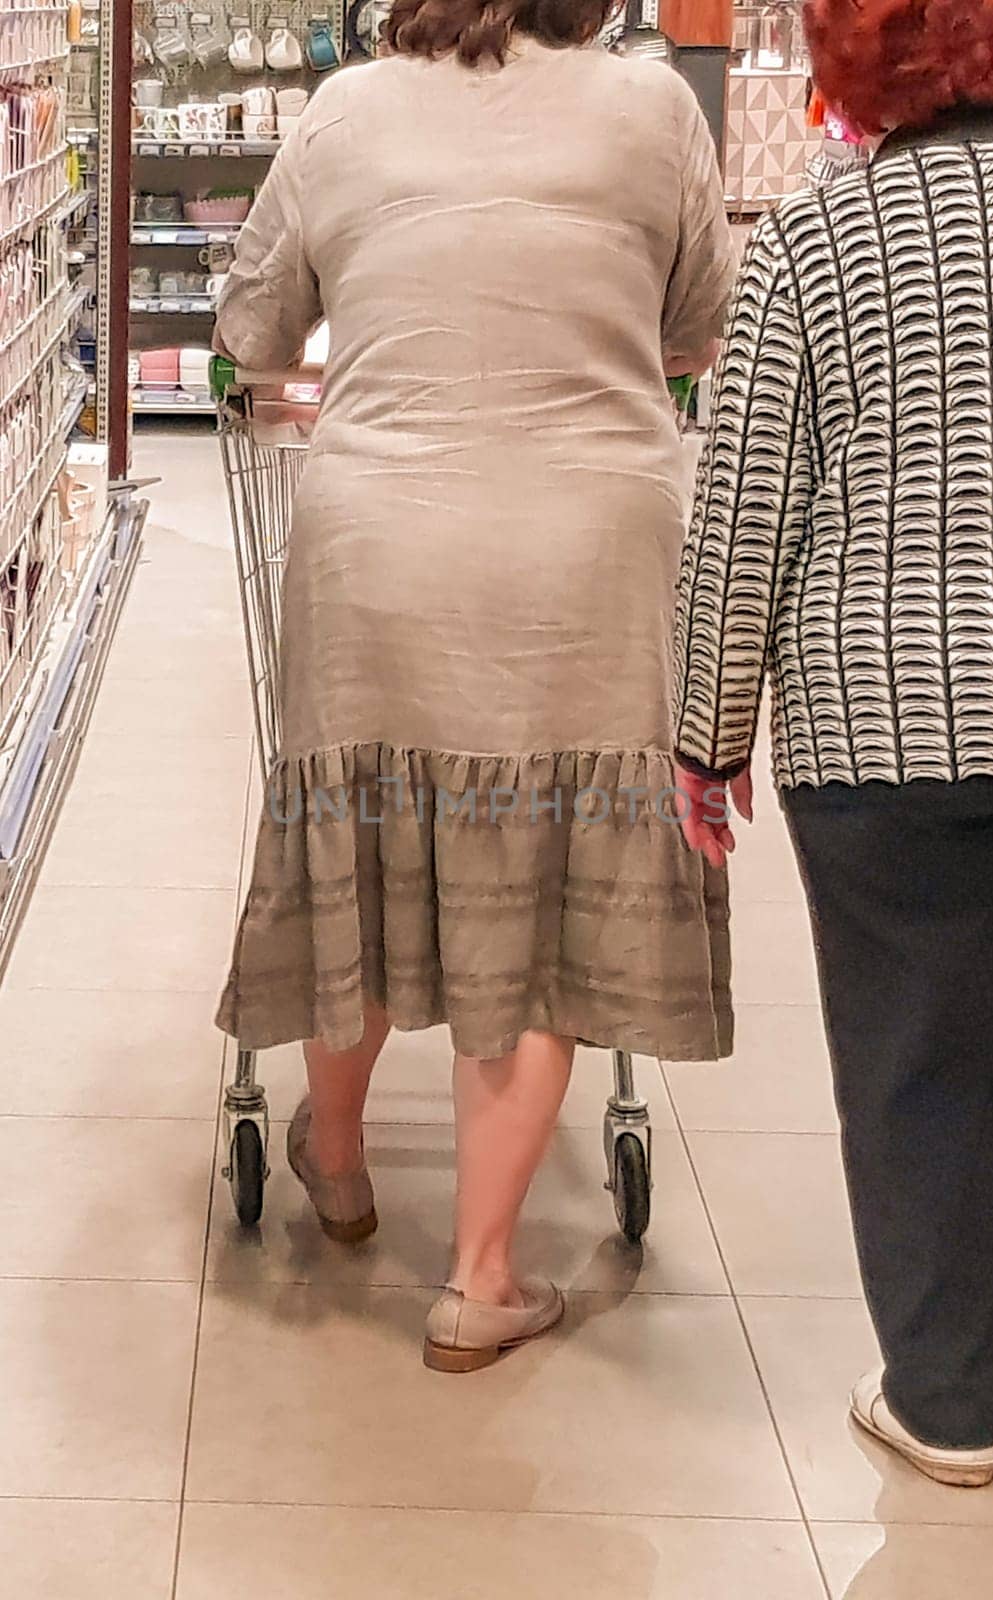 Two elderly women with a shopping cart of Caucasian appearance in a supermarket, back view, vertical, close-up.